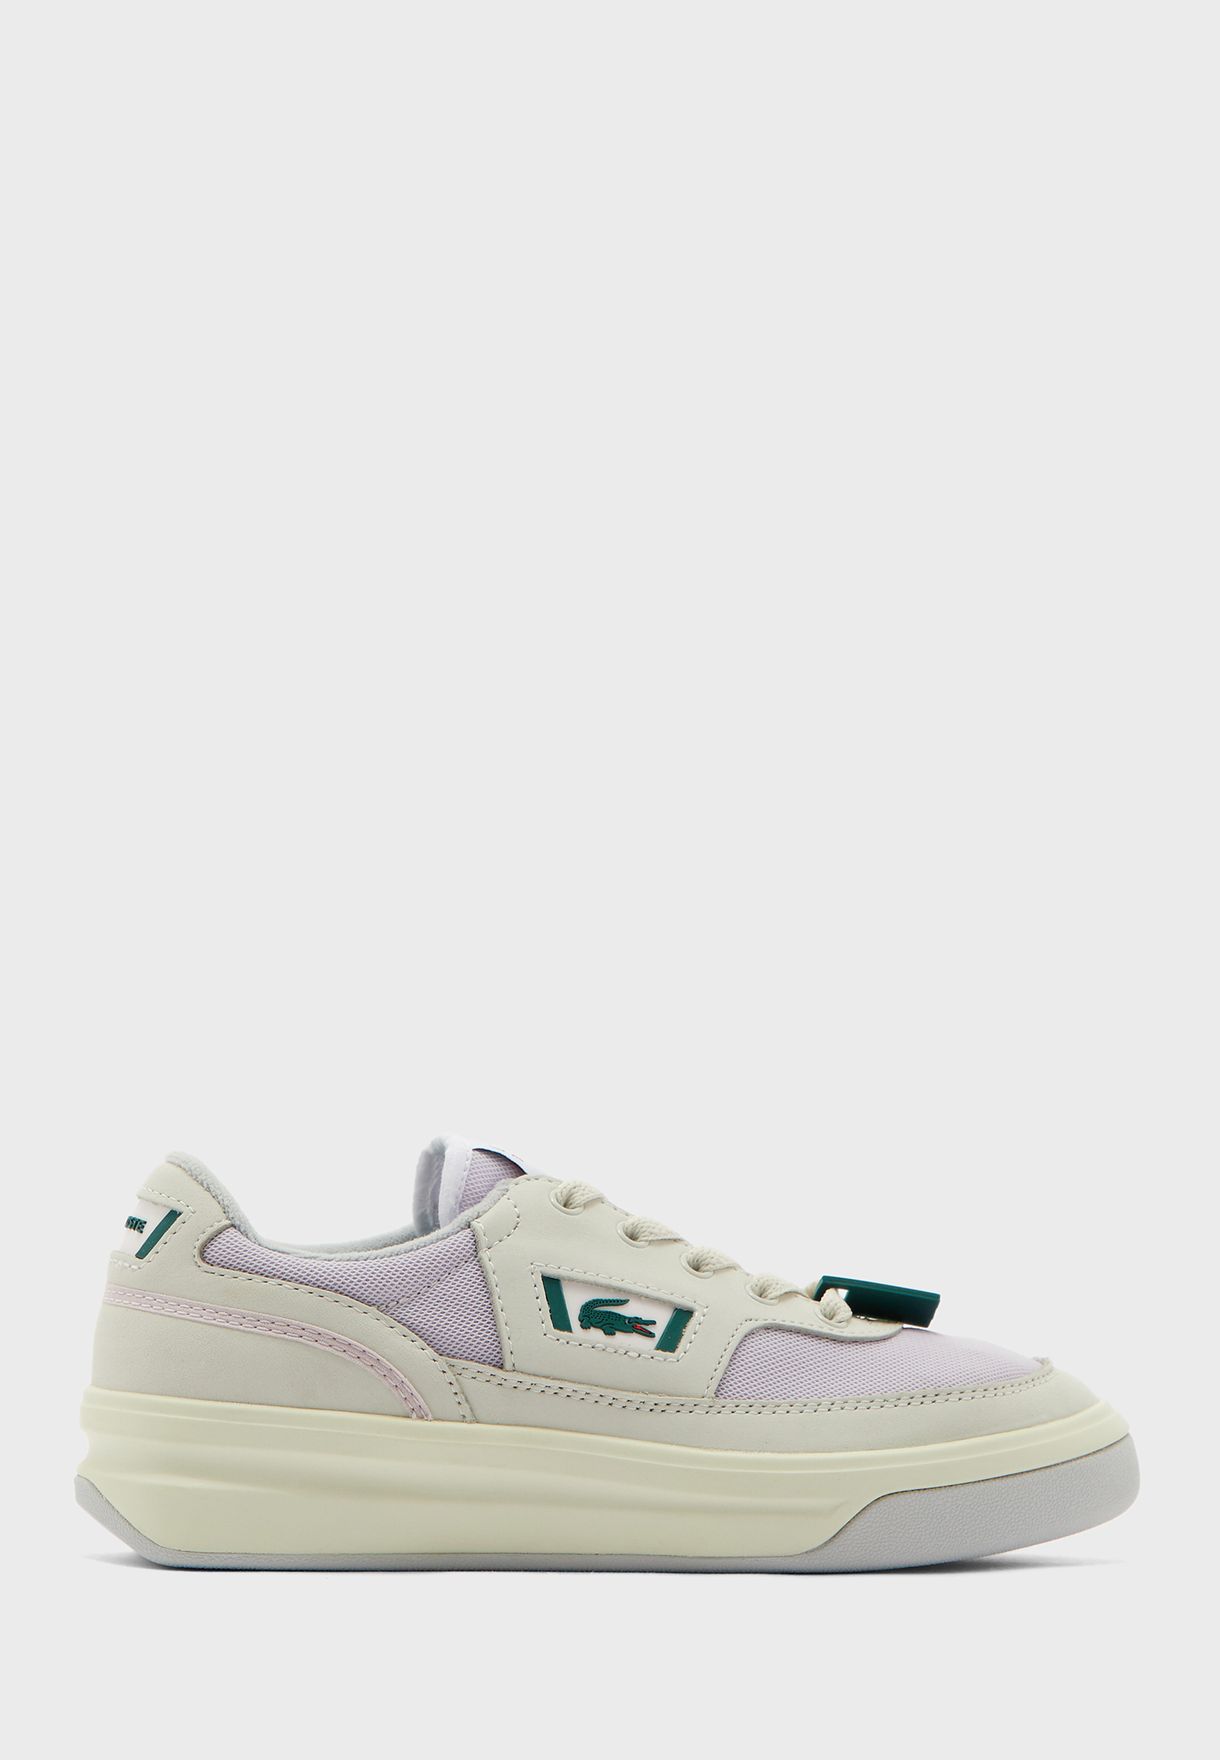 lacoste shoes online shopping